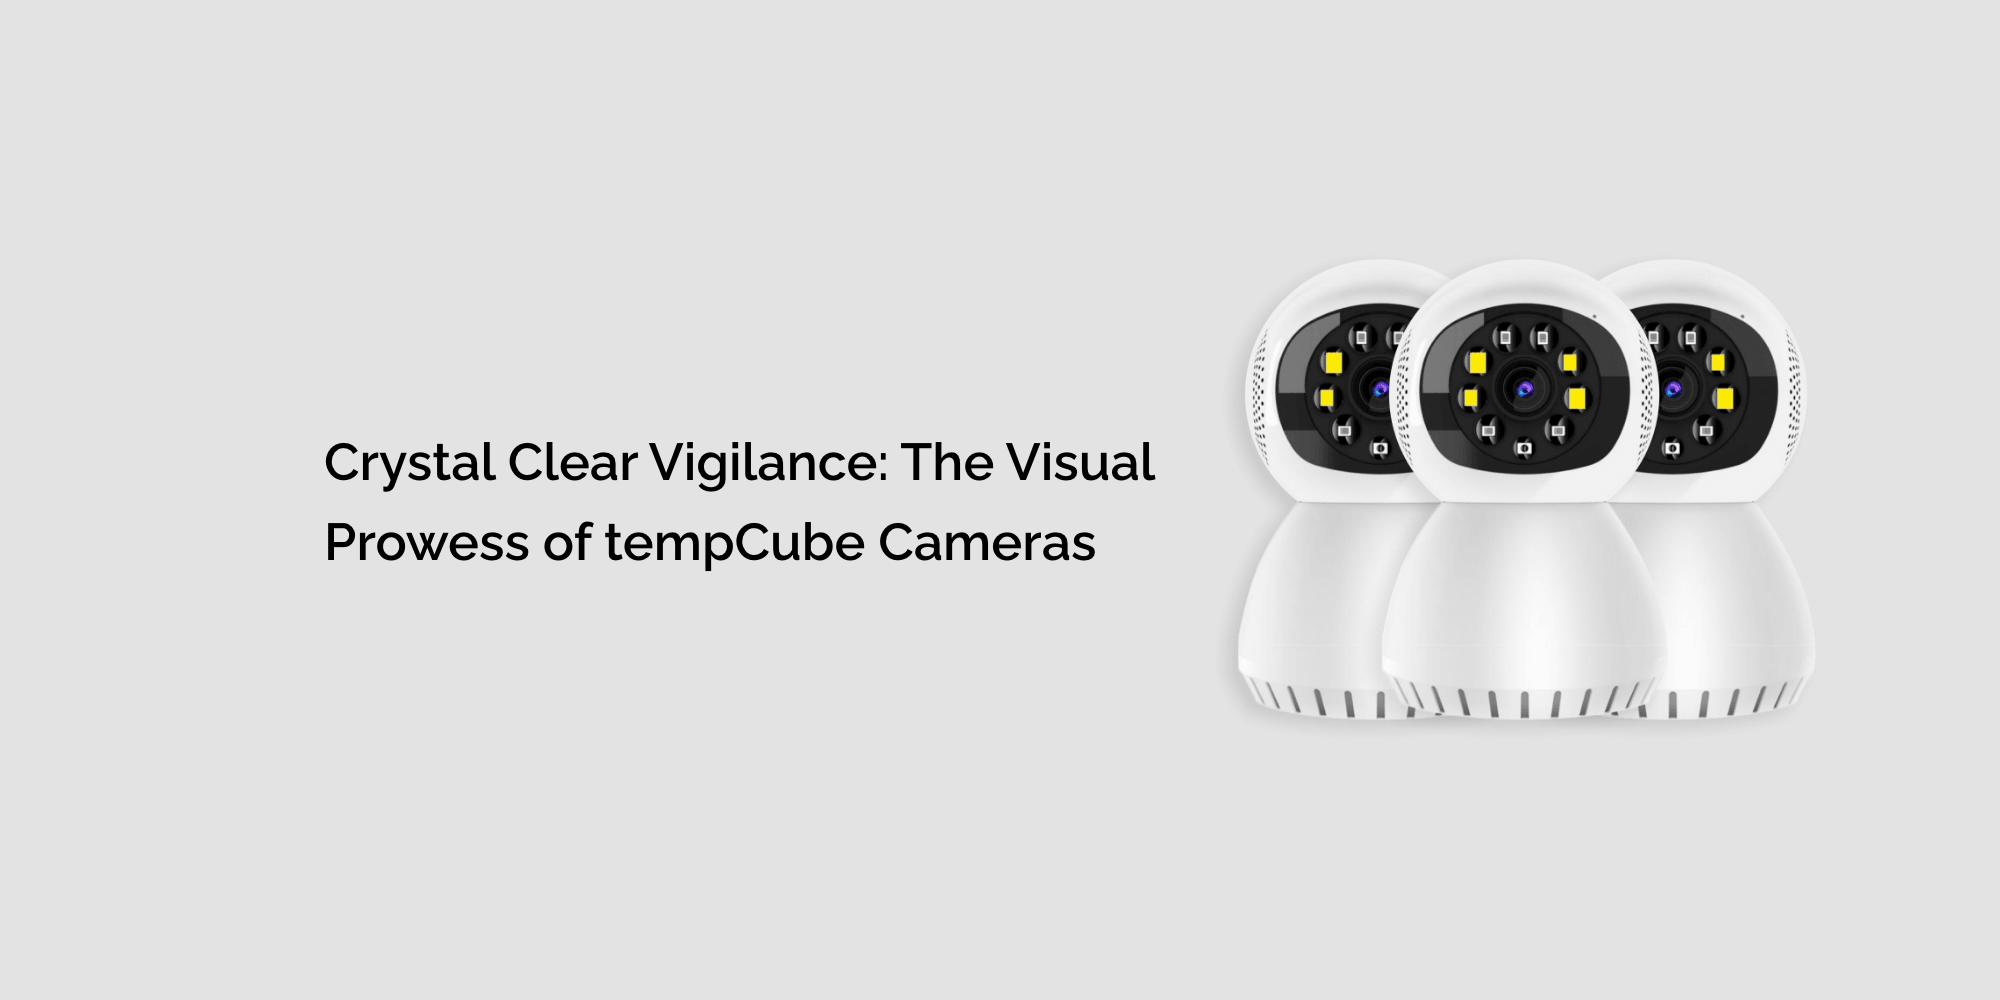 Crystal Clear Vigilance: The Visual Prowess of tempCube Cameras